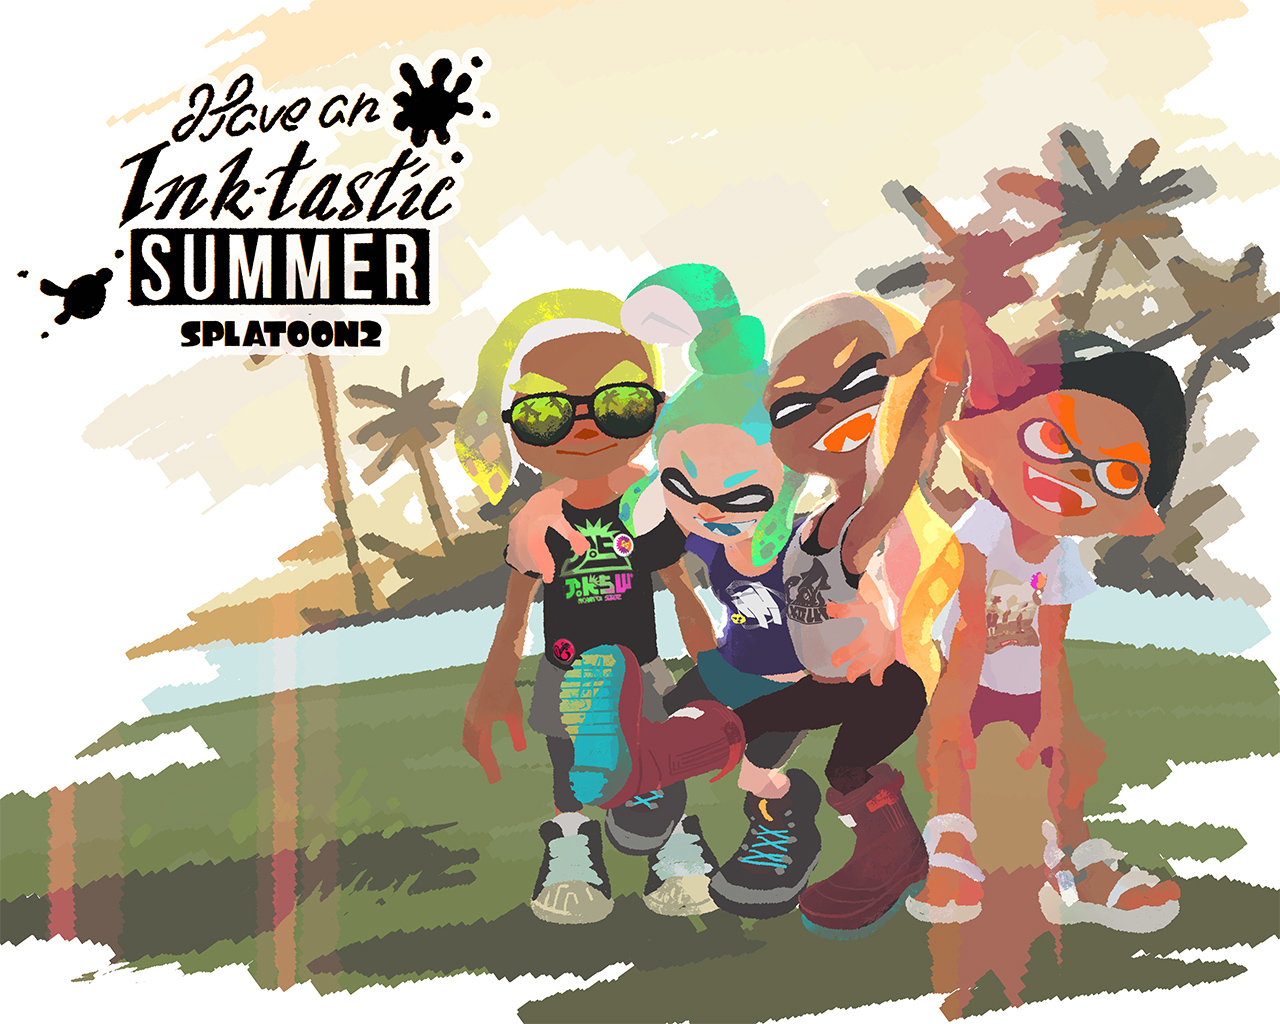 Here S A Splatoon 2 Summer Wallpaper For Your Pc And Smartphone Nintendosoup